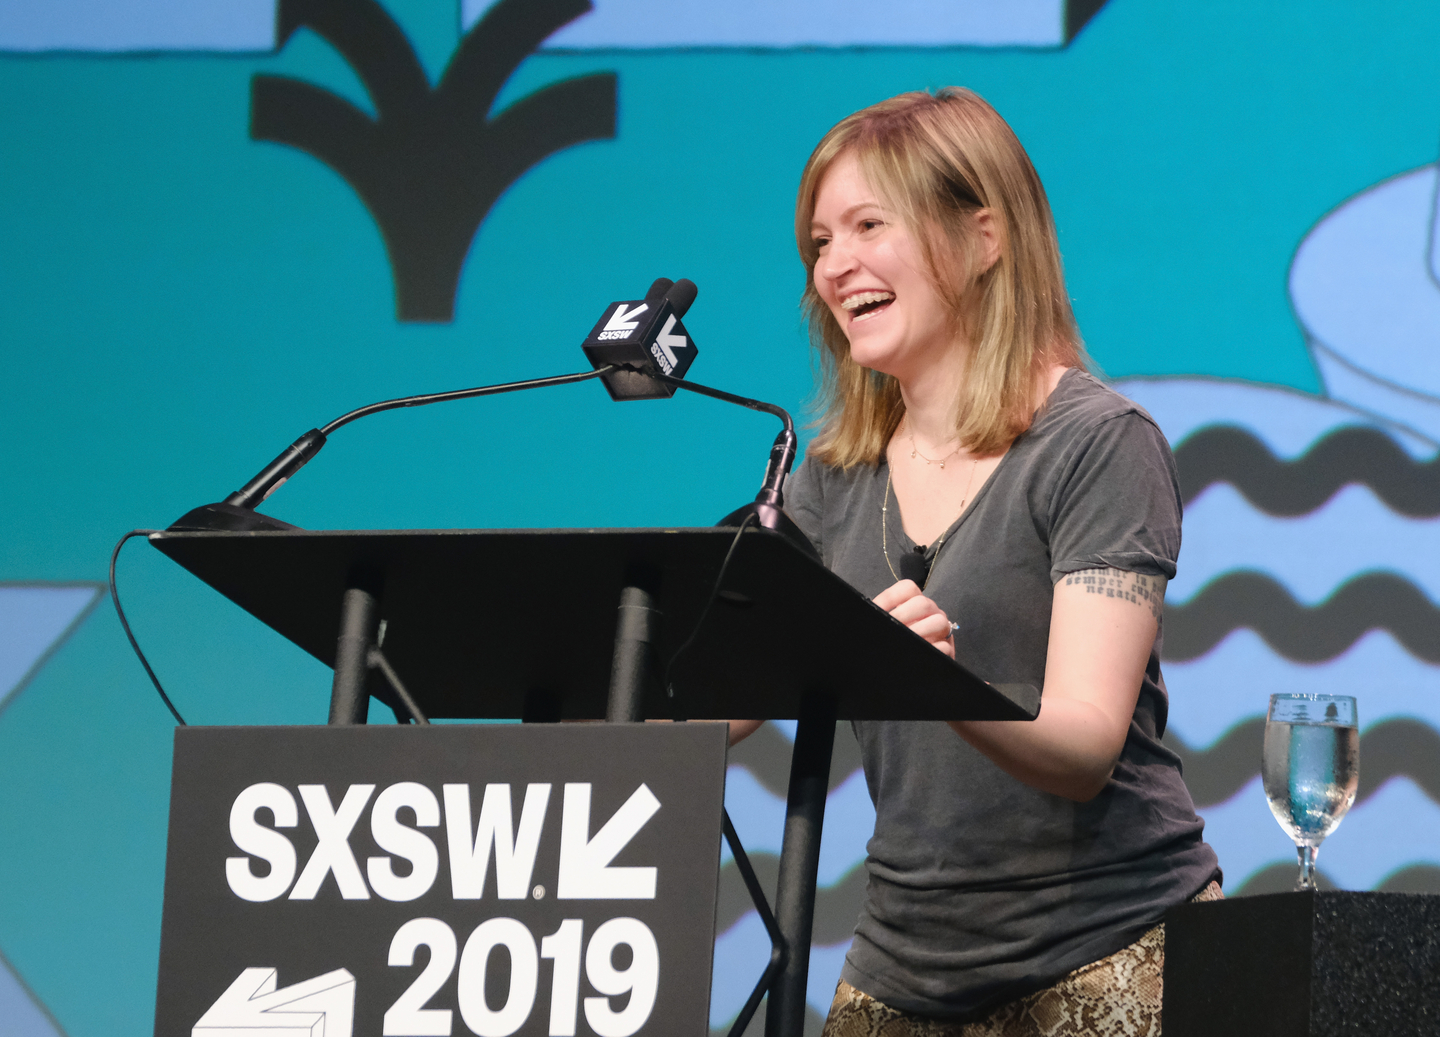 Susan Folwer at her Featured Session – Photo by Rita Quinn/Getty Images for SXSW